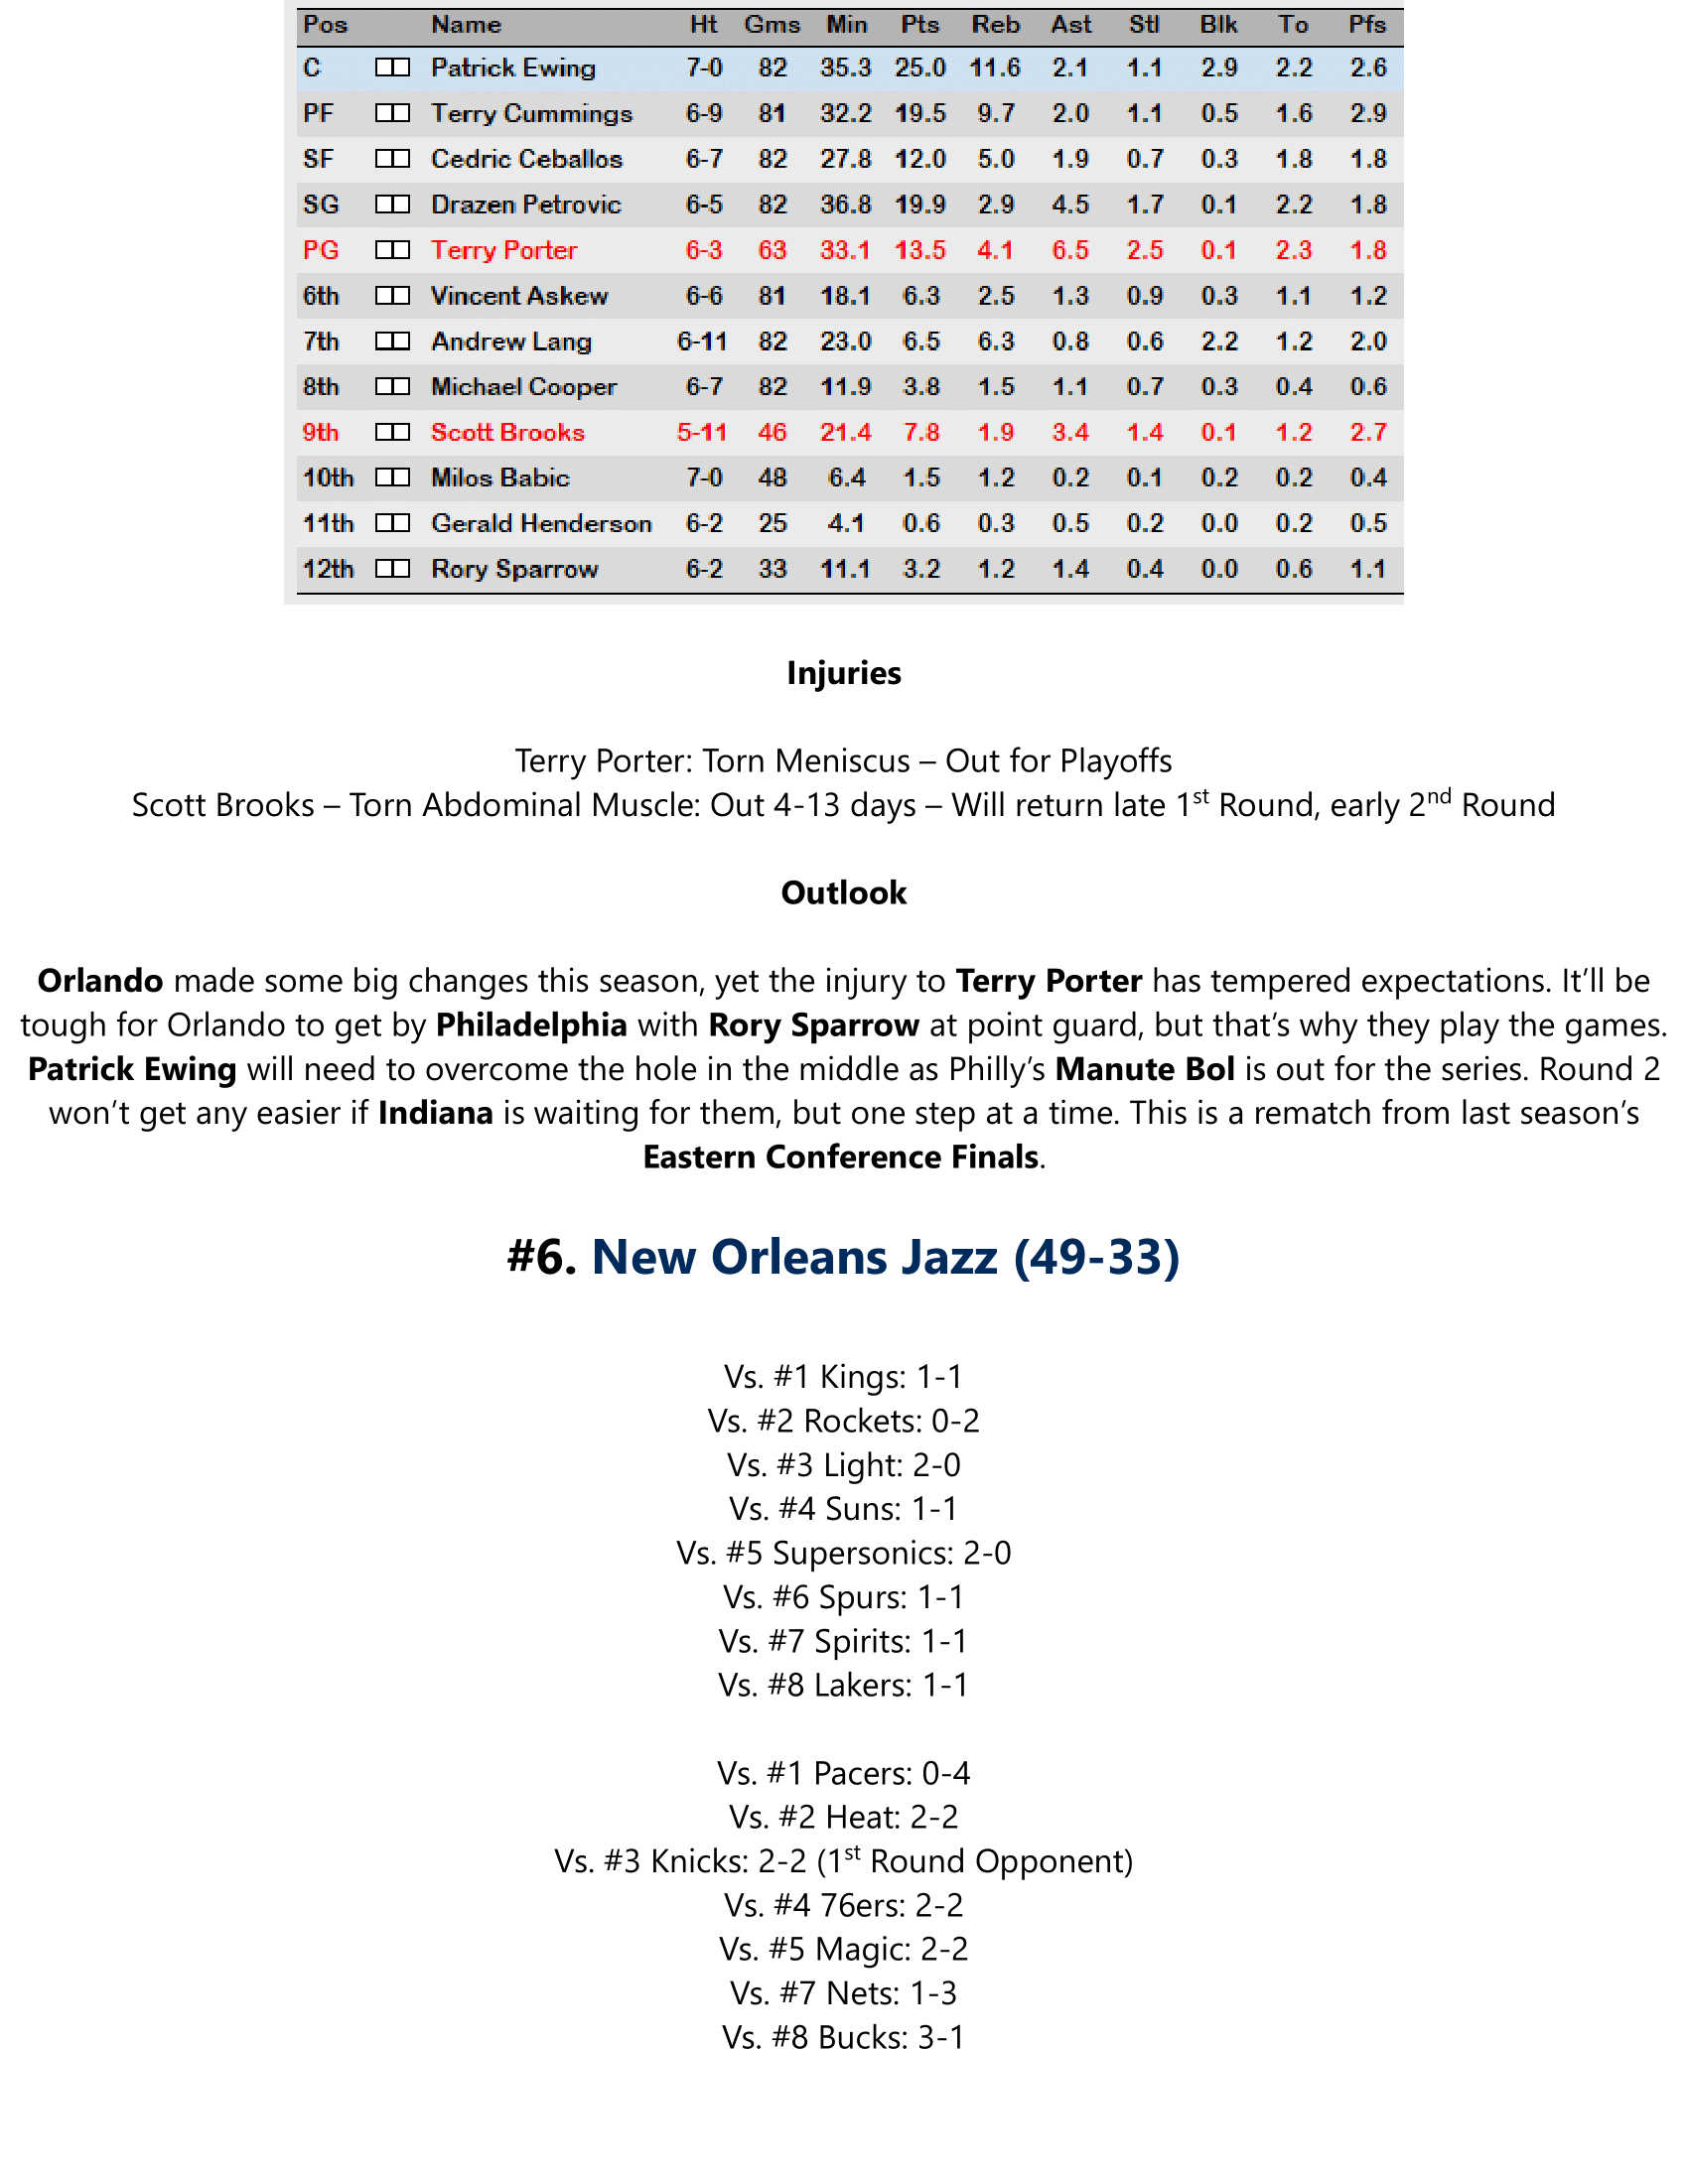 91-92-Part-4-Playoff-Preview-21.png